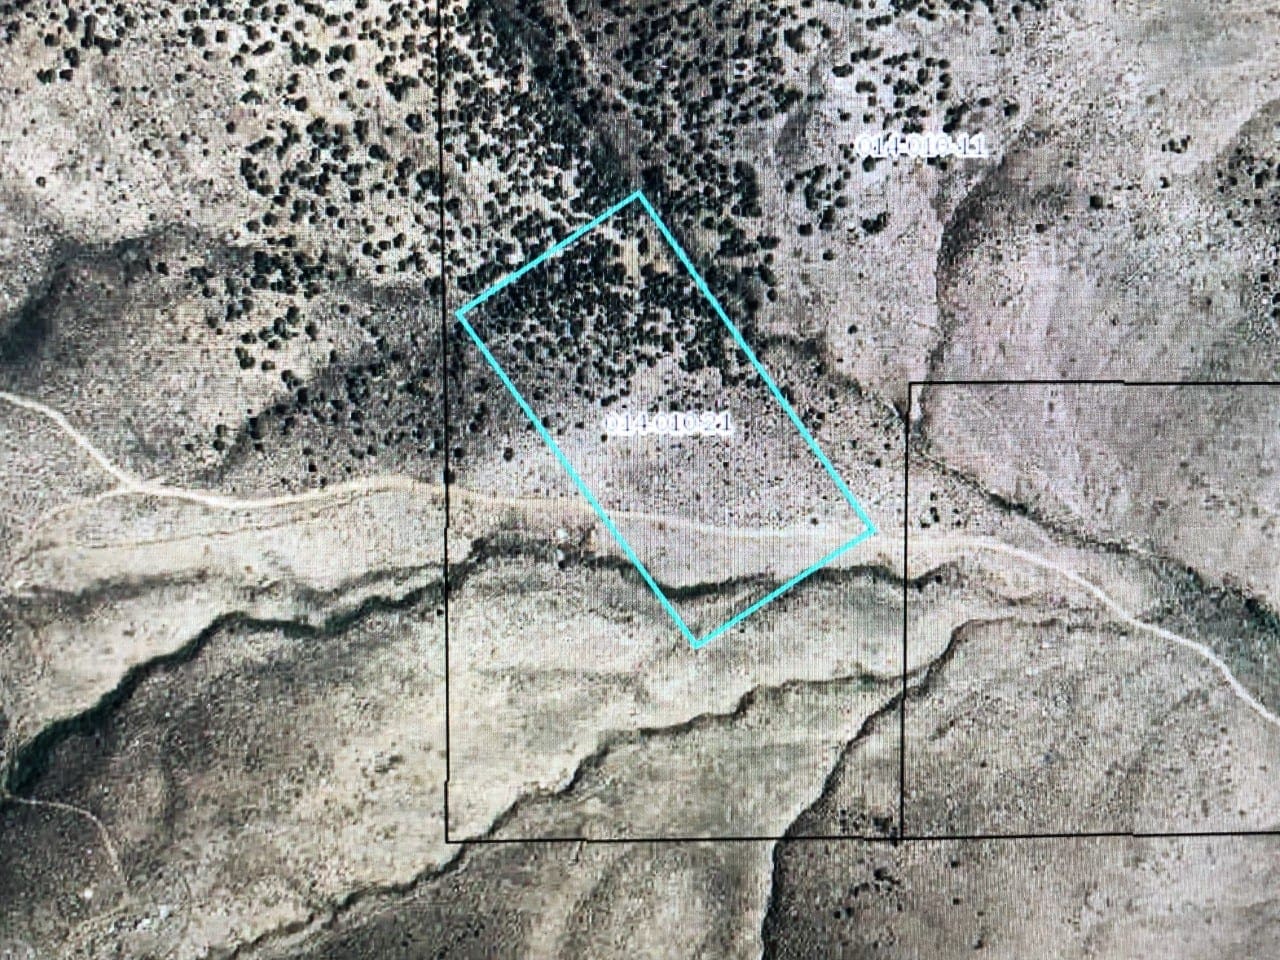 15.84 Acres in GOLD NOTE CANYON, HIDDEN TREASURE #1, SUR 2097 – A PATENTED MINING CLAIM -PAST PRODUCER OF GOLD, SILVER & ZINC photo 42